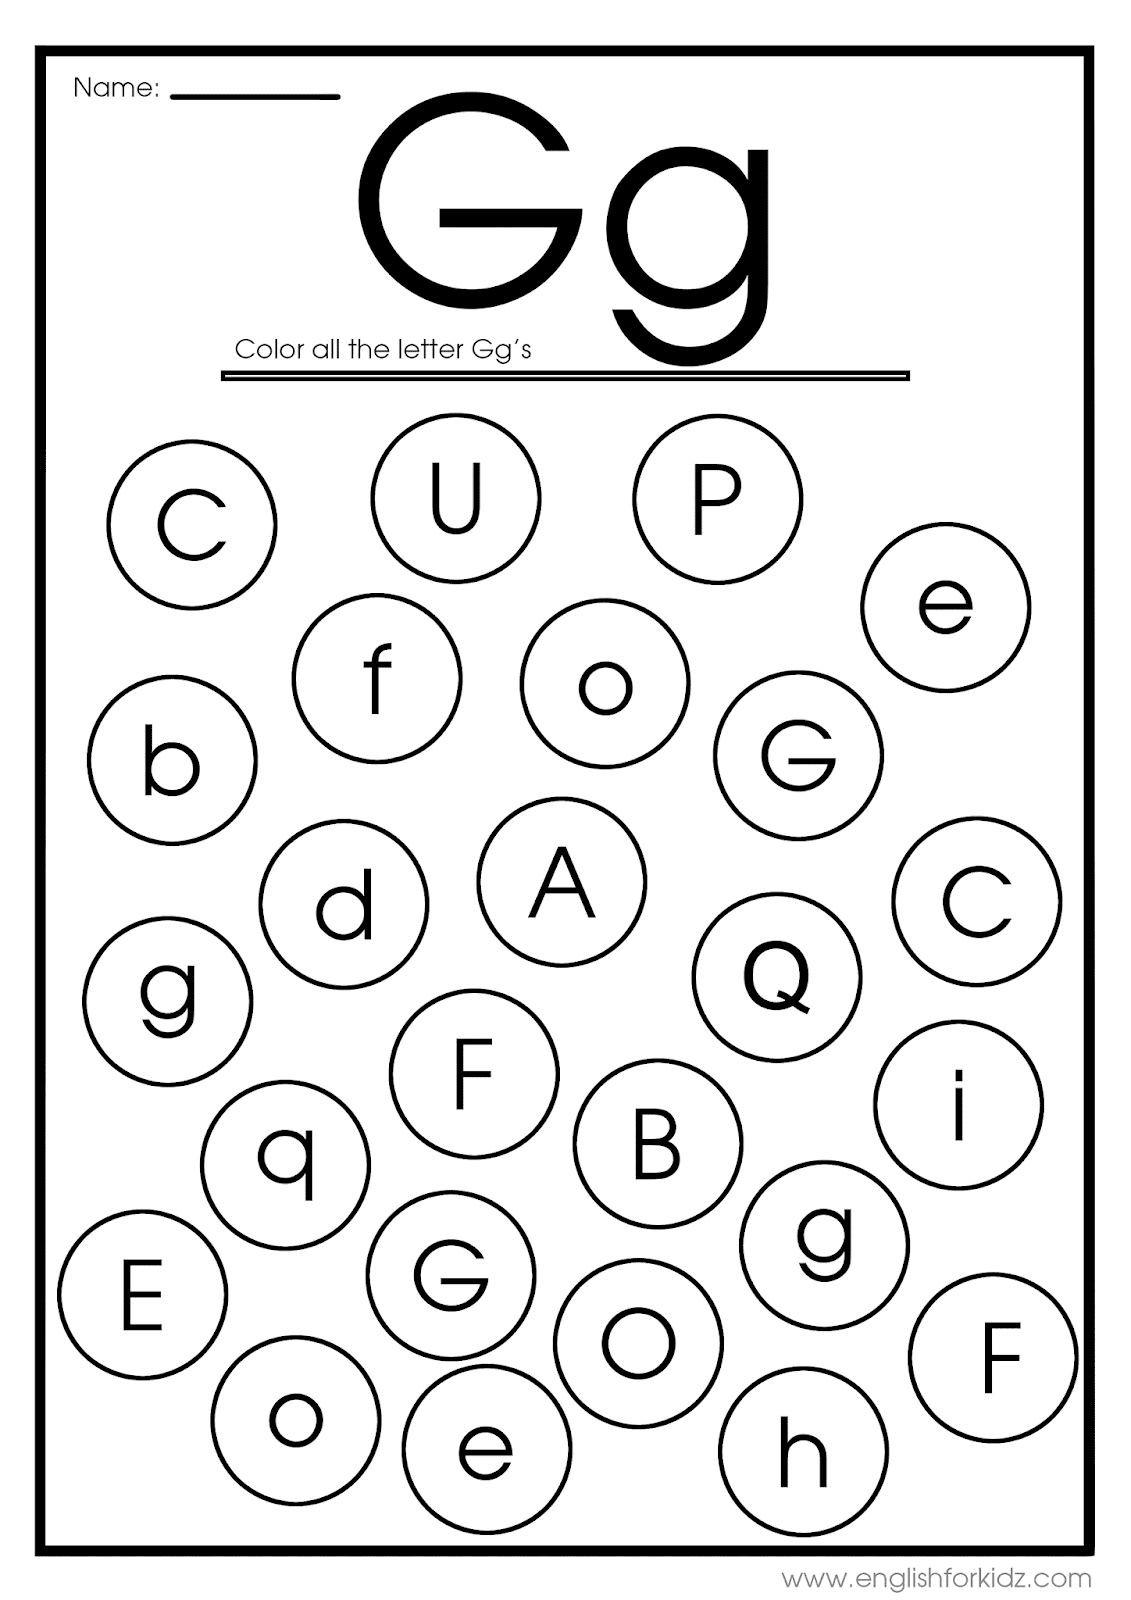 English For Kids Step By Step Letter G Worksheets Flash 